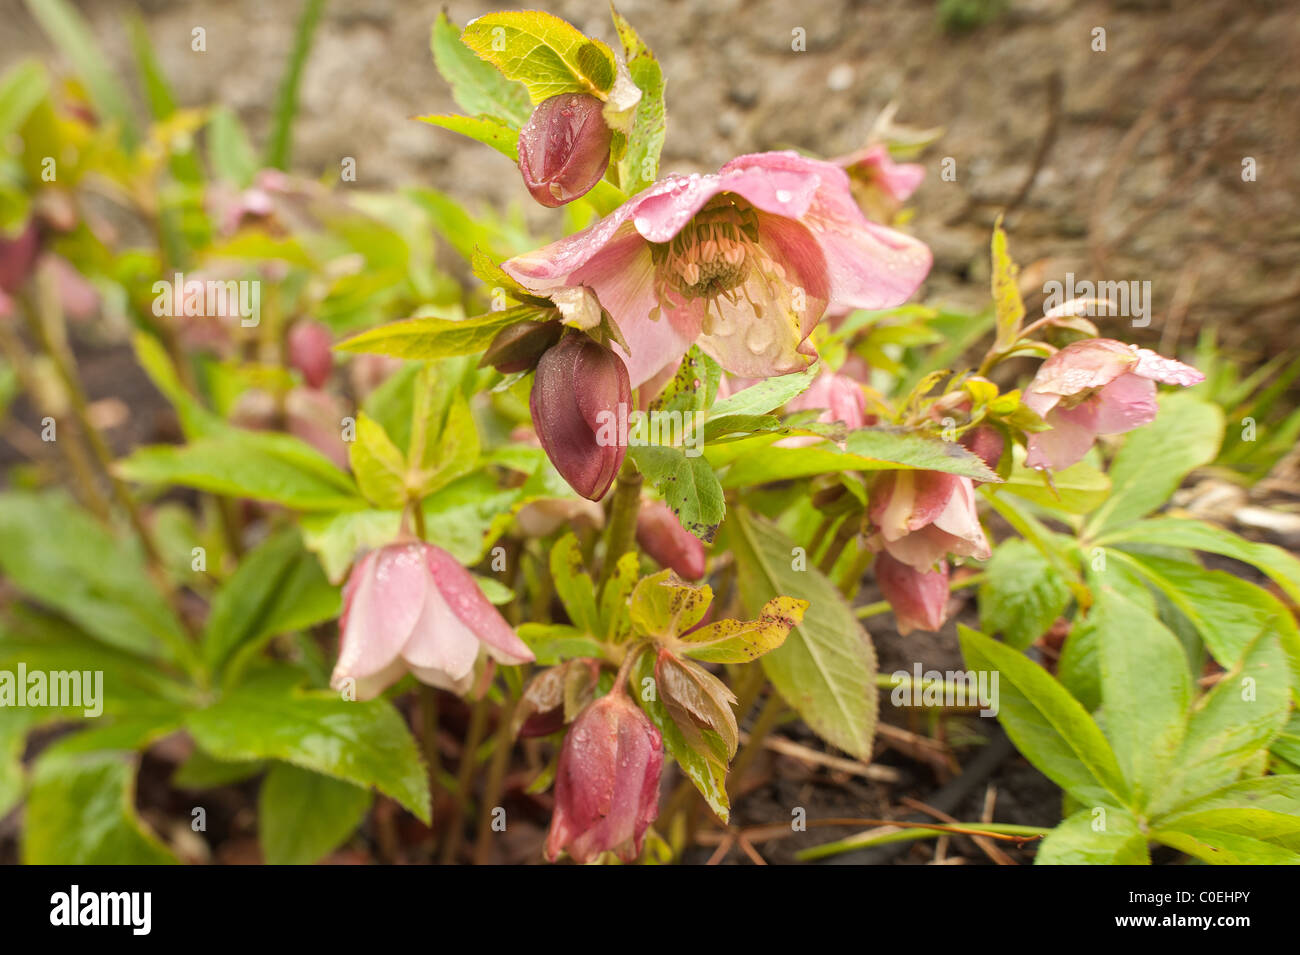 hellebore flowers coated in rain droplets, a hardy evergreen and deciduous perennial Stock Photo